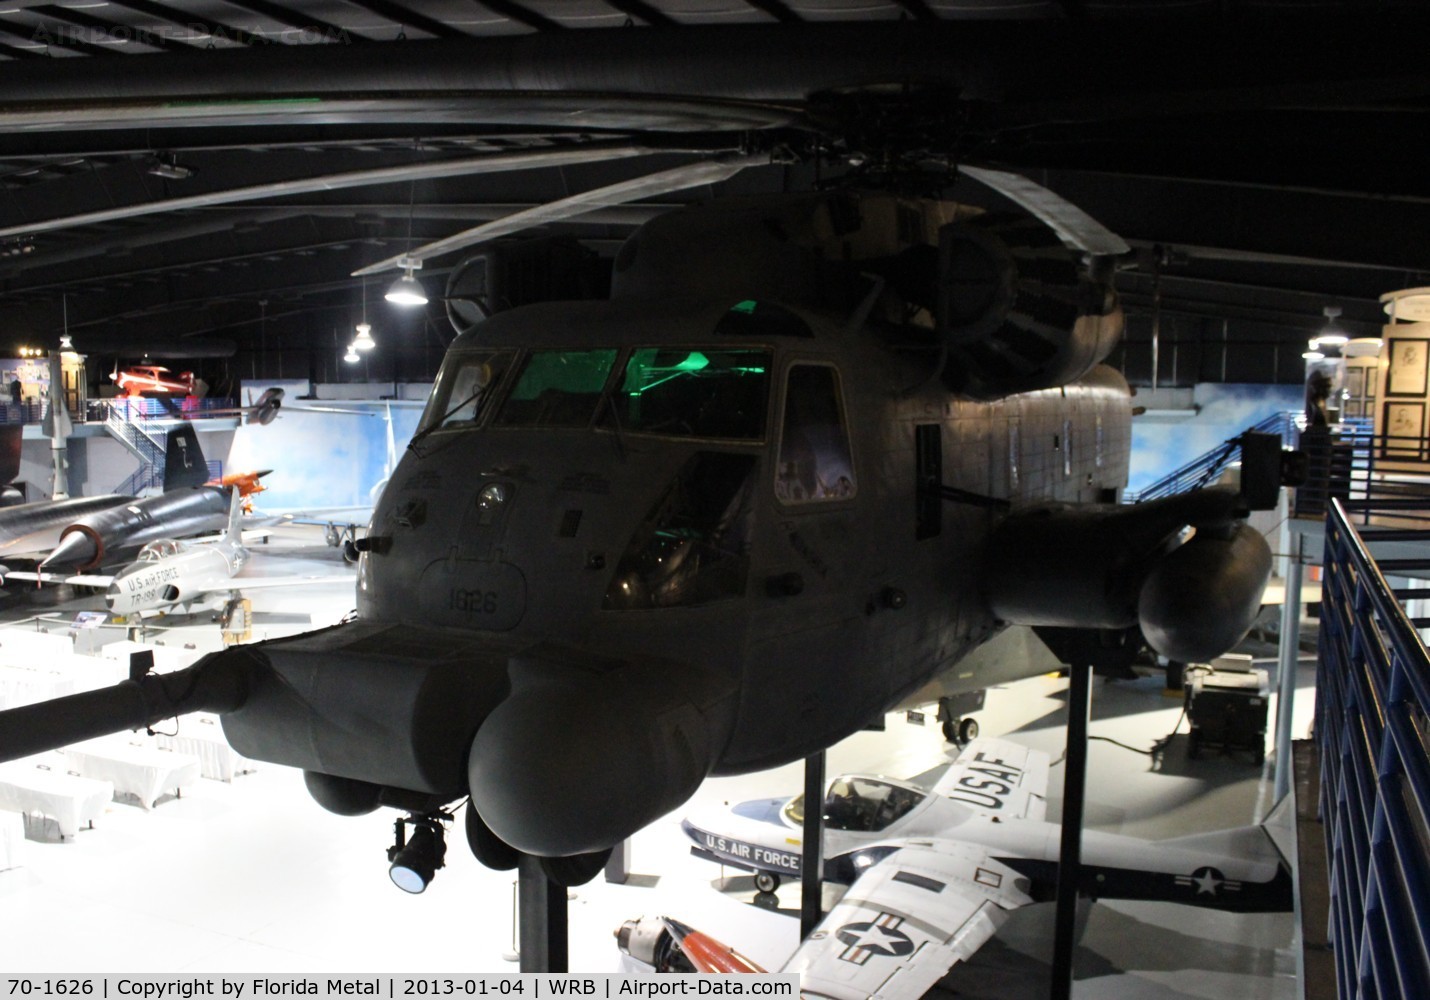 70-1626, 1970 Sikorsky MH-53J Pave Low III C/N 65-336, MH-53J Pave Low